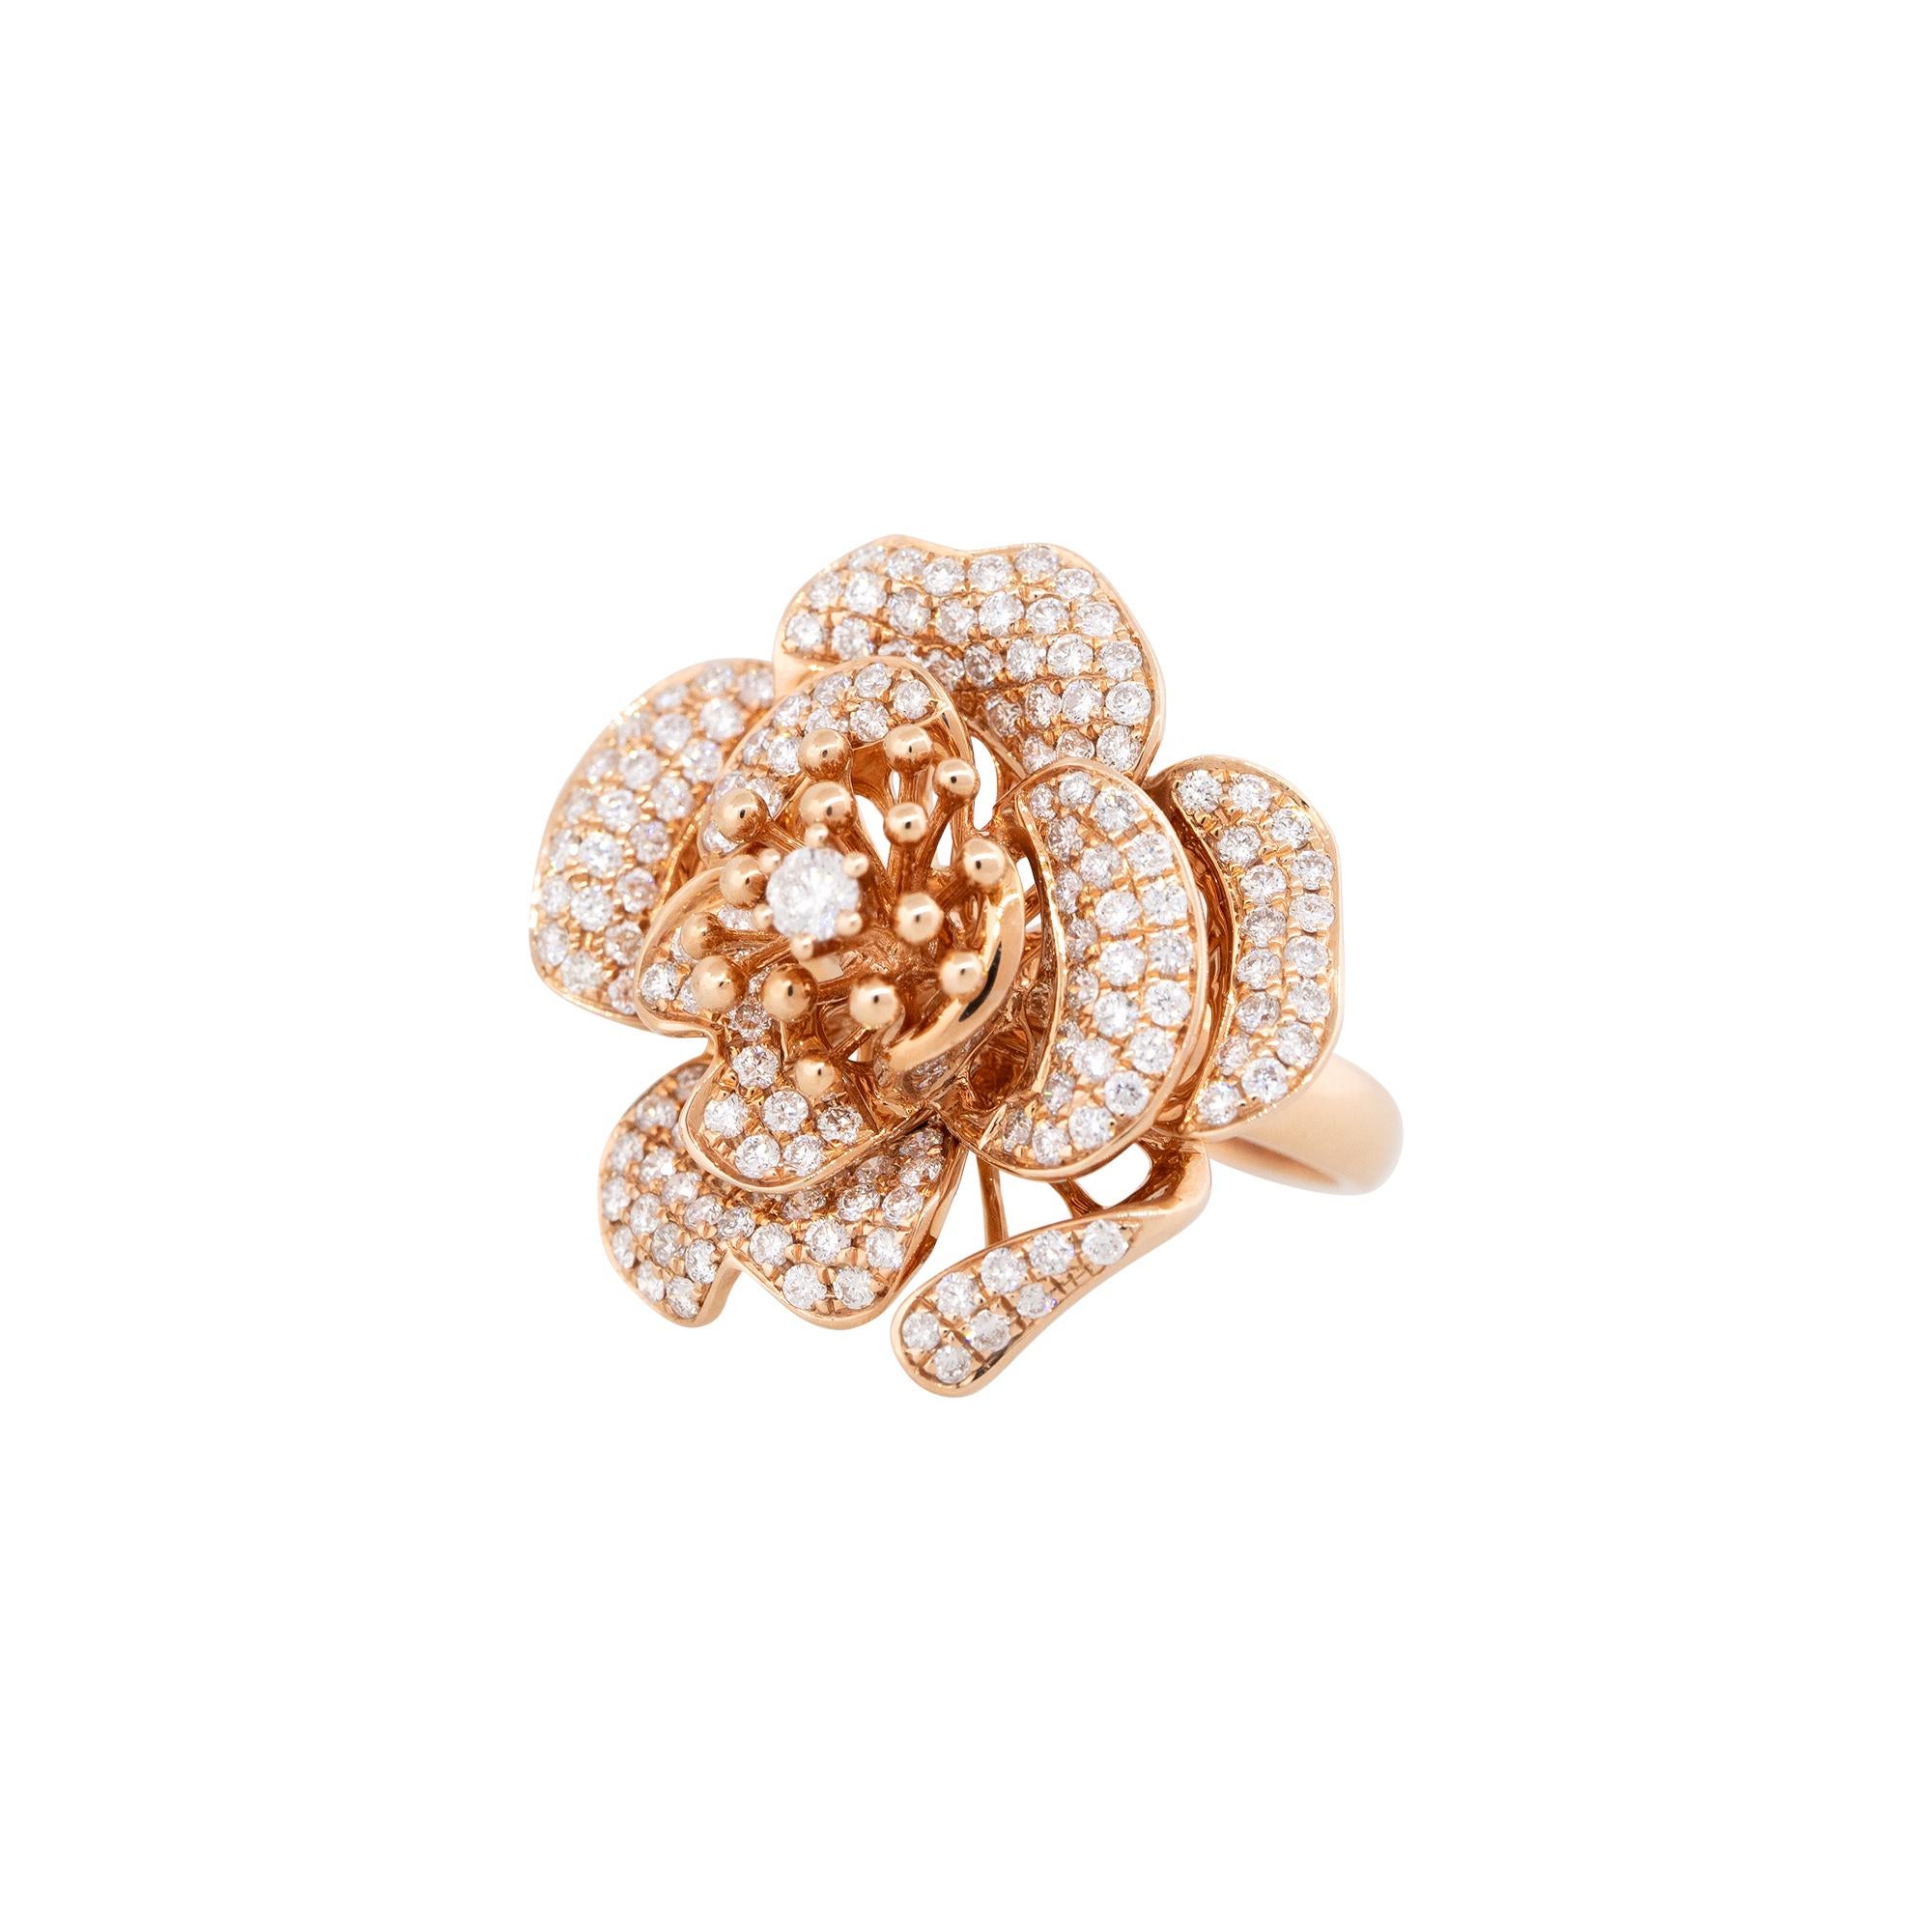 18k Rose Gold 1.46ctw Pave Diamond Rose Shape Ring

Product: Rose Shaped Pave Diamond Ring
Material: 18k Rose Gold
Diamond Details: There are approximately 1.46 carats of, Pave set, Round Brilliant cut diamonds. There is a larger stone in the center